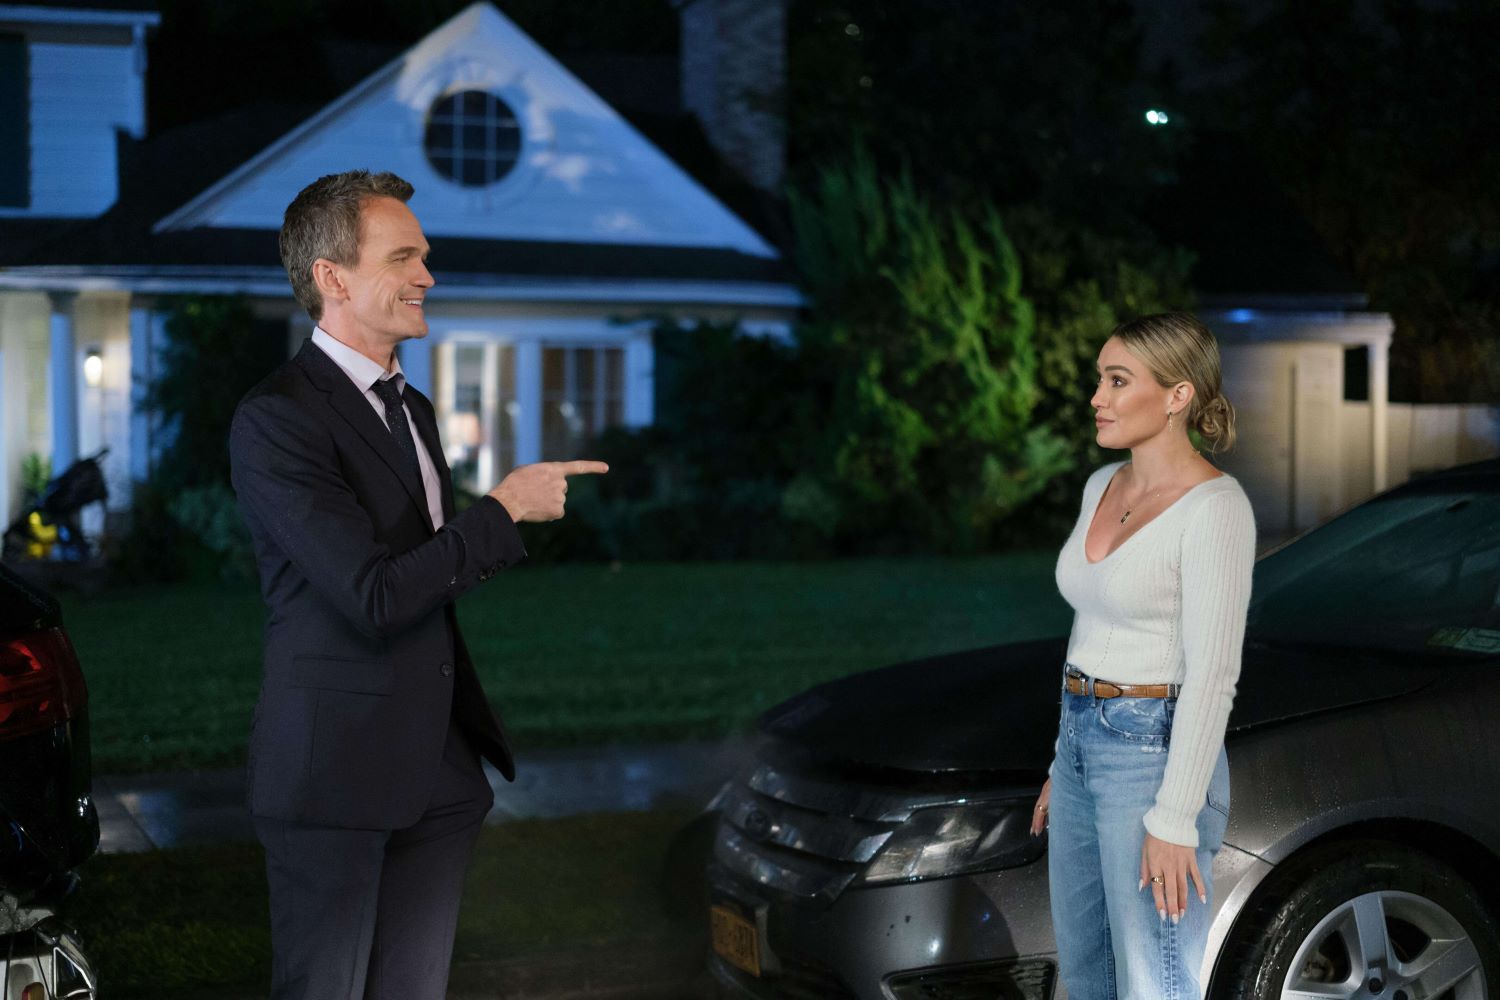 Neil Patrick Harris as Barney Stinson and Hilary Duff as Sophie Tompkins in 'How I Met Your Father' Season 2 on Hulu. Barney wears a black suit over a white button-up shirt and black tie. Sophie wears a white long-sleeved shirt and light blue jeans.